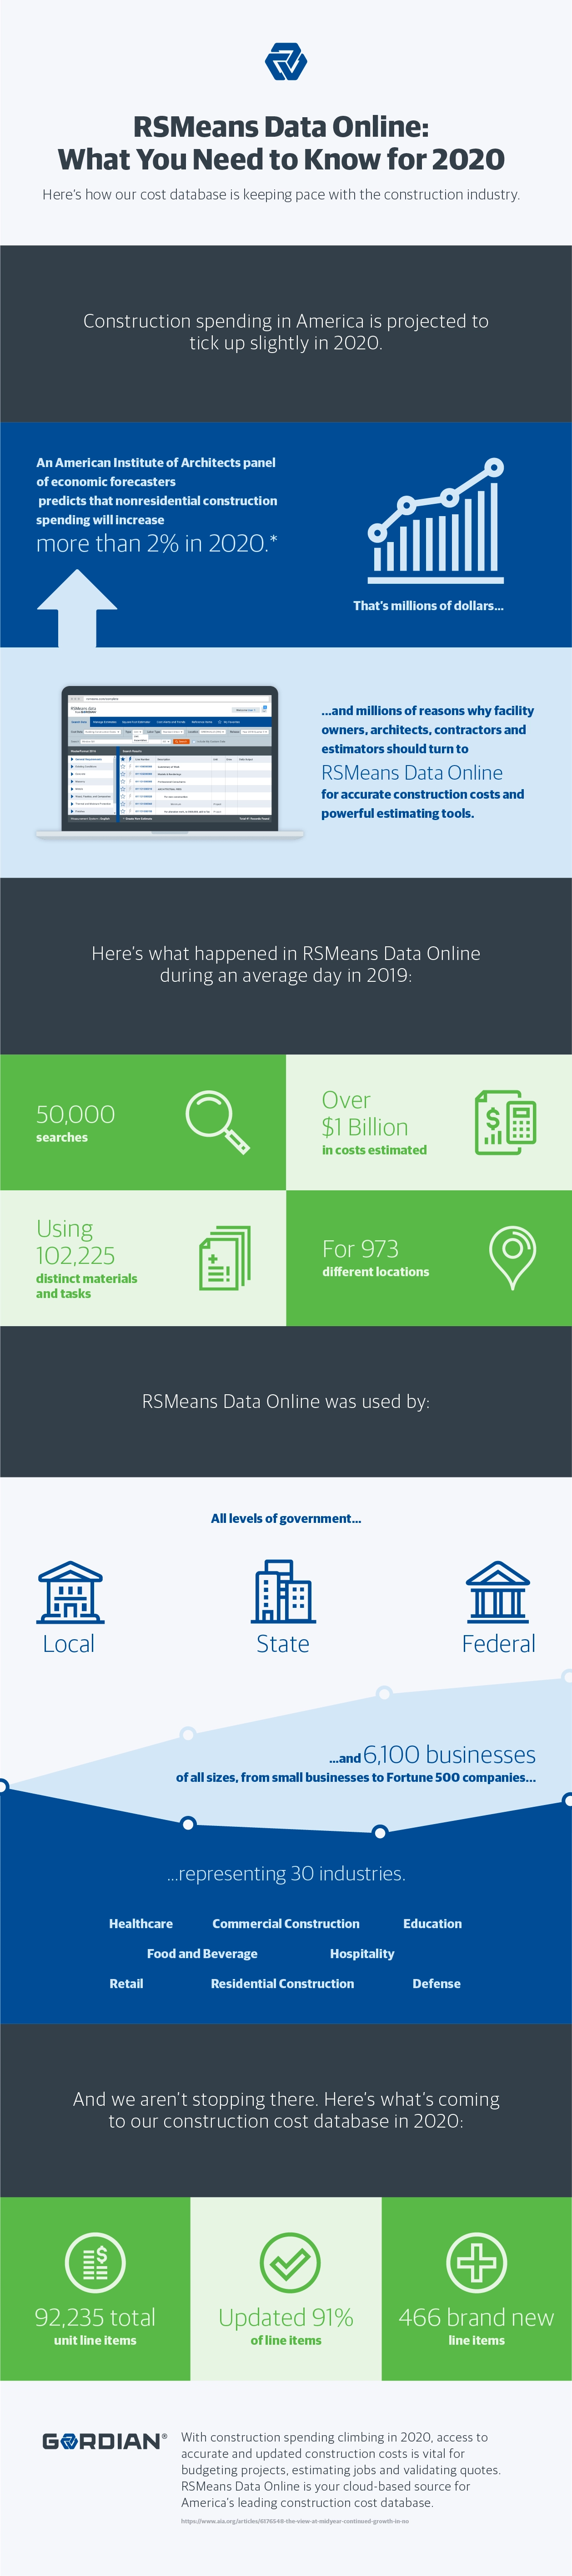 RSMeans Data Online: What You Need to Know for 2020 1